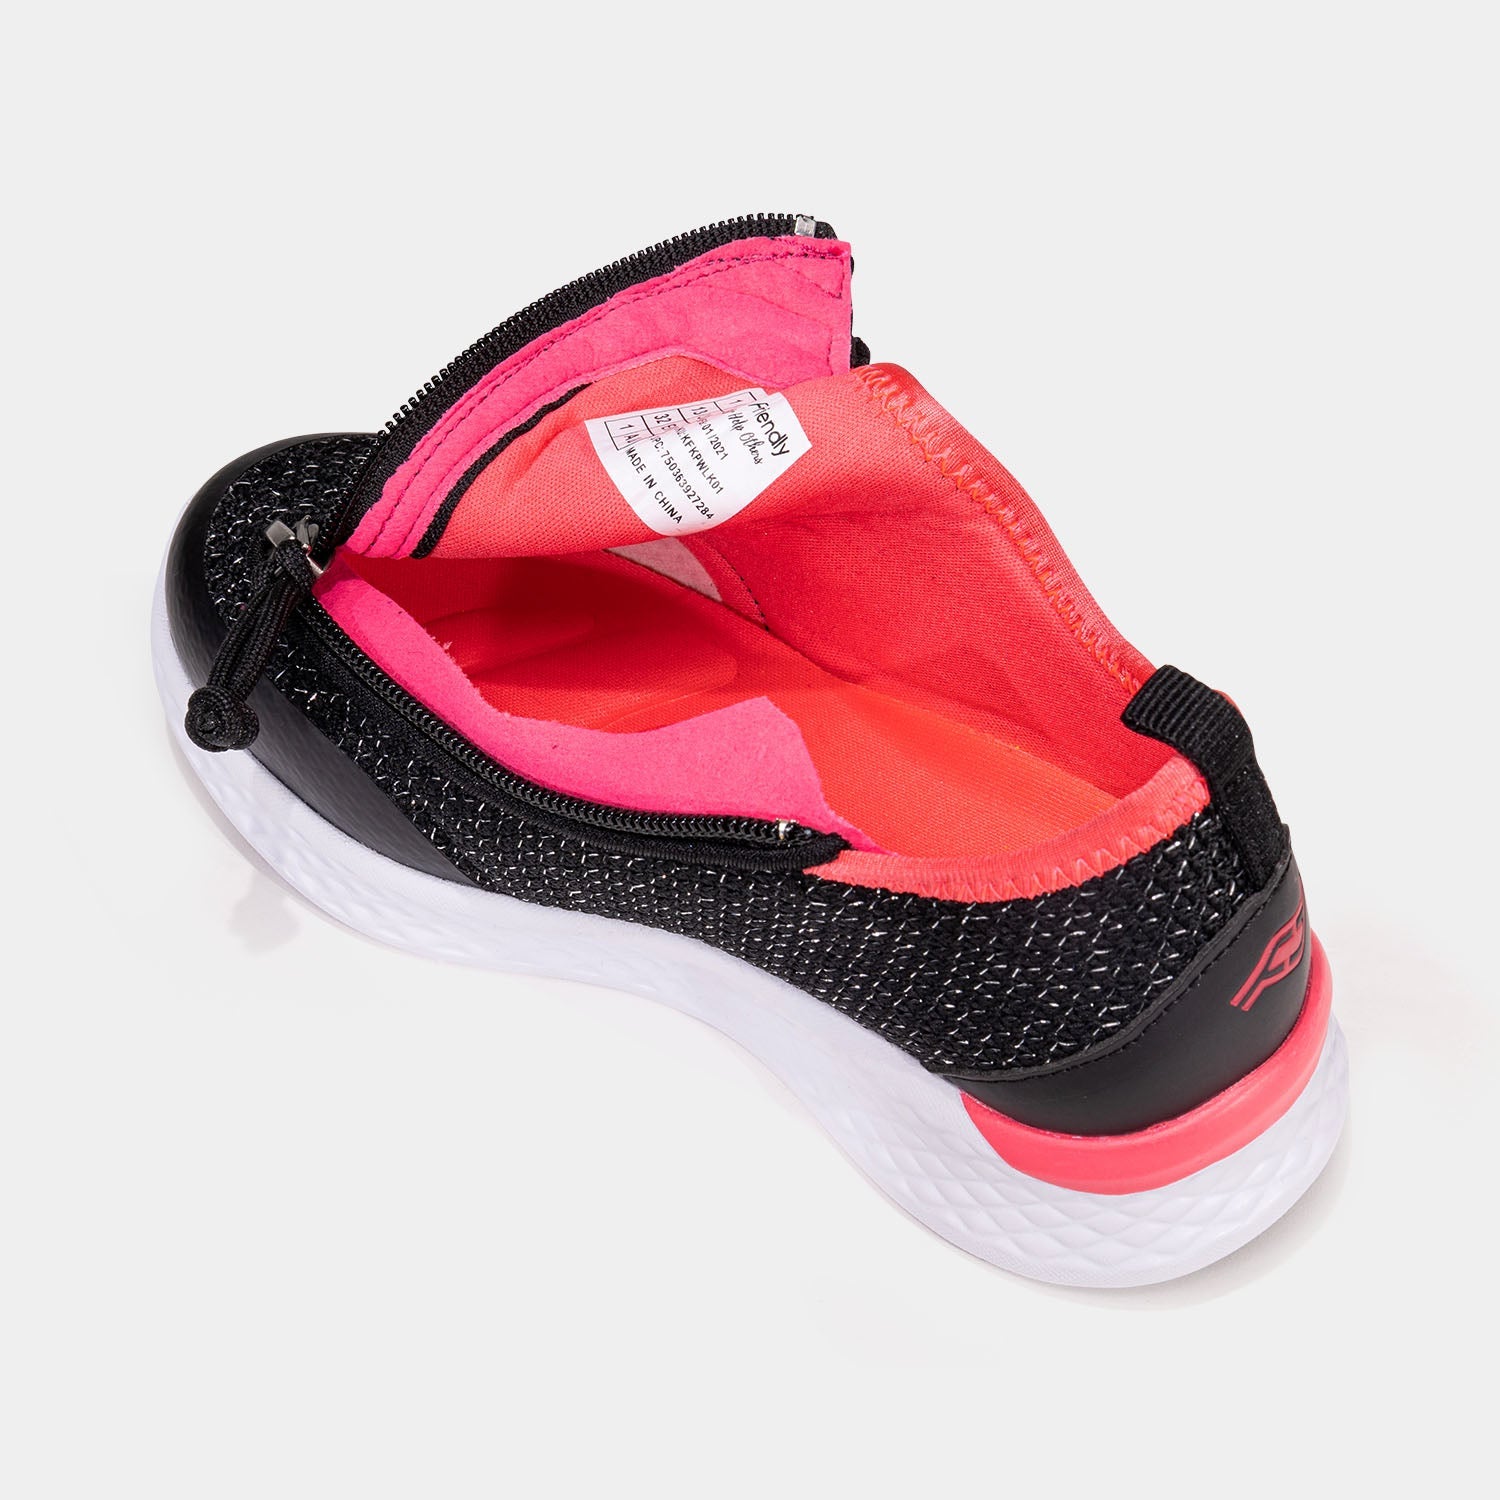 Black kids shoe unzipped with side zipper access and hot pink interior padding.